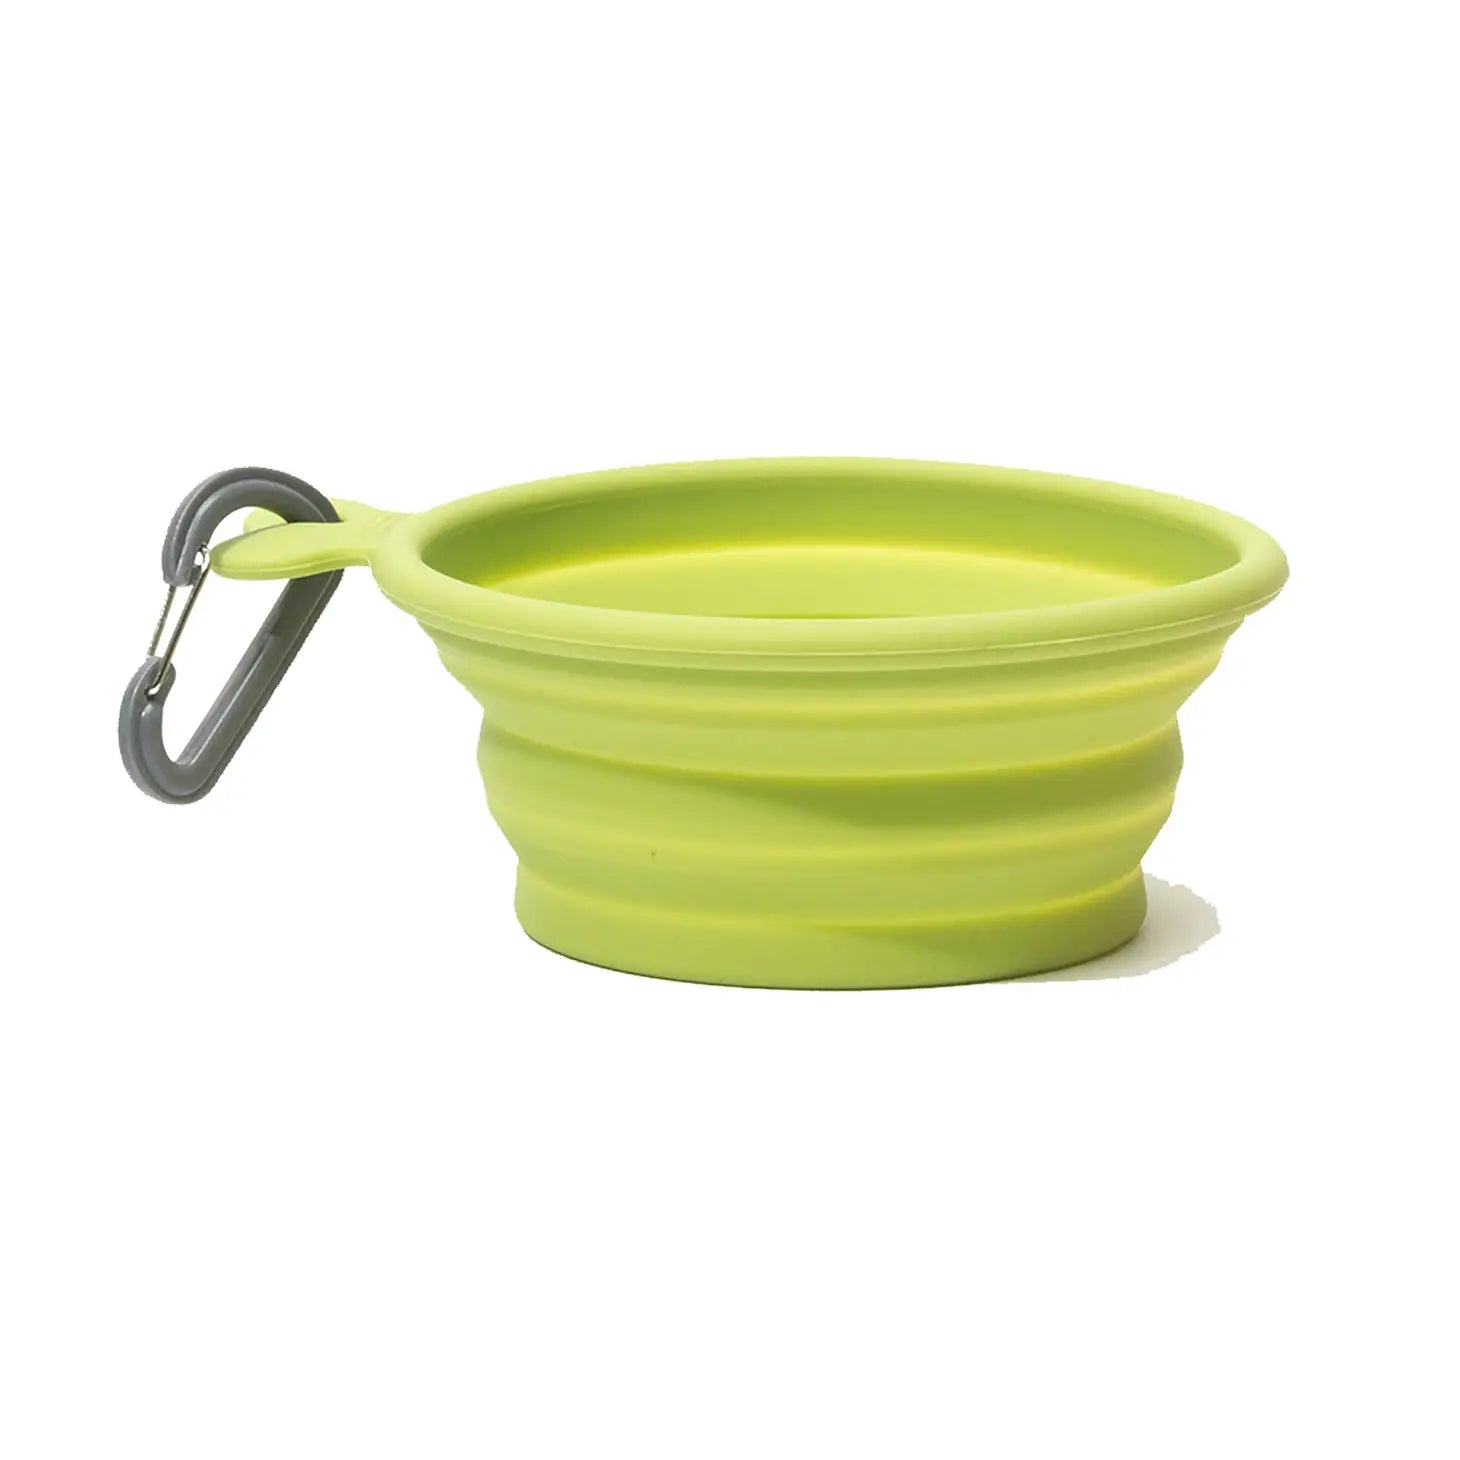 Isolated side view of a green collapsible bowl with a gray carabiner 